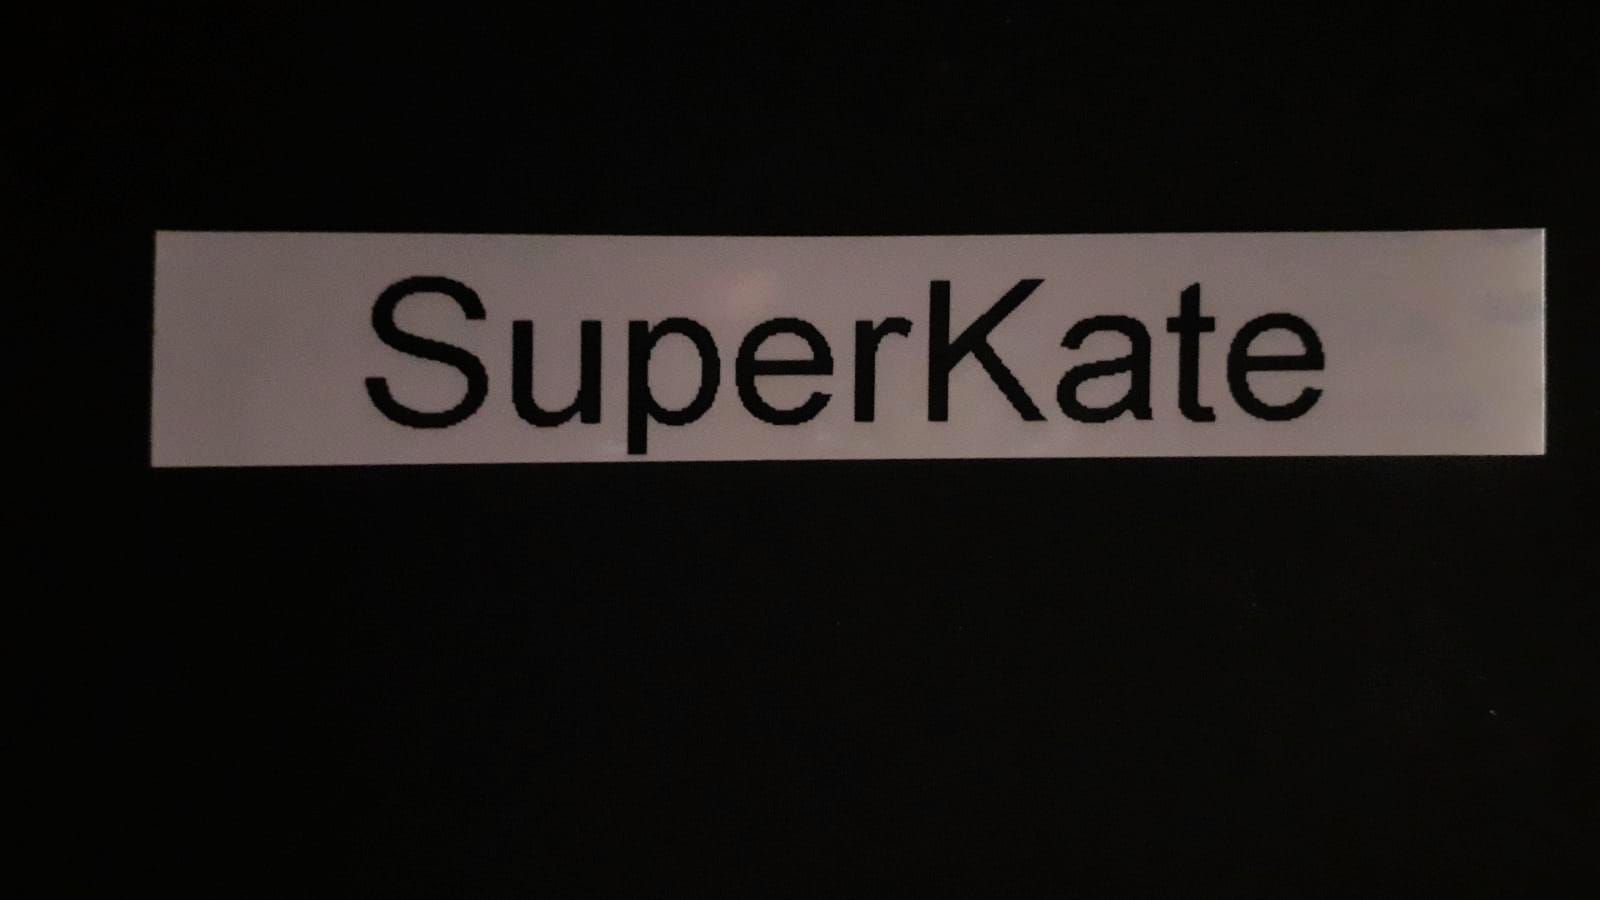 SUPERKATE'S BIRTHDAY PARTY II 4 DAY RAID TRAIN II FOR THE CHANNELS I MOD FOR AROUND THE WORLD II LET'S PARTY HARD!! SUPERKATE ~ SUPERMOD ~ MODLIFE ~ CANCER SURVIVOR ~ WARRIOR ~ RAIDPAL ~ TWITCHFAM ~ TWITCHCOM ~ TWITCHLIFE ~ TWITCH 2023